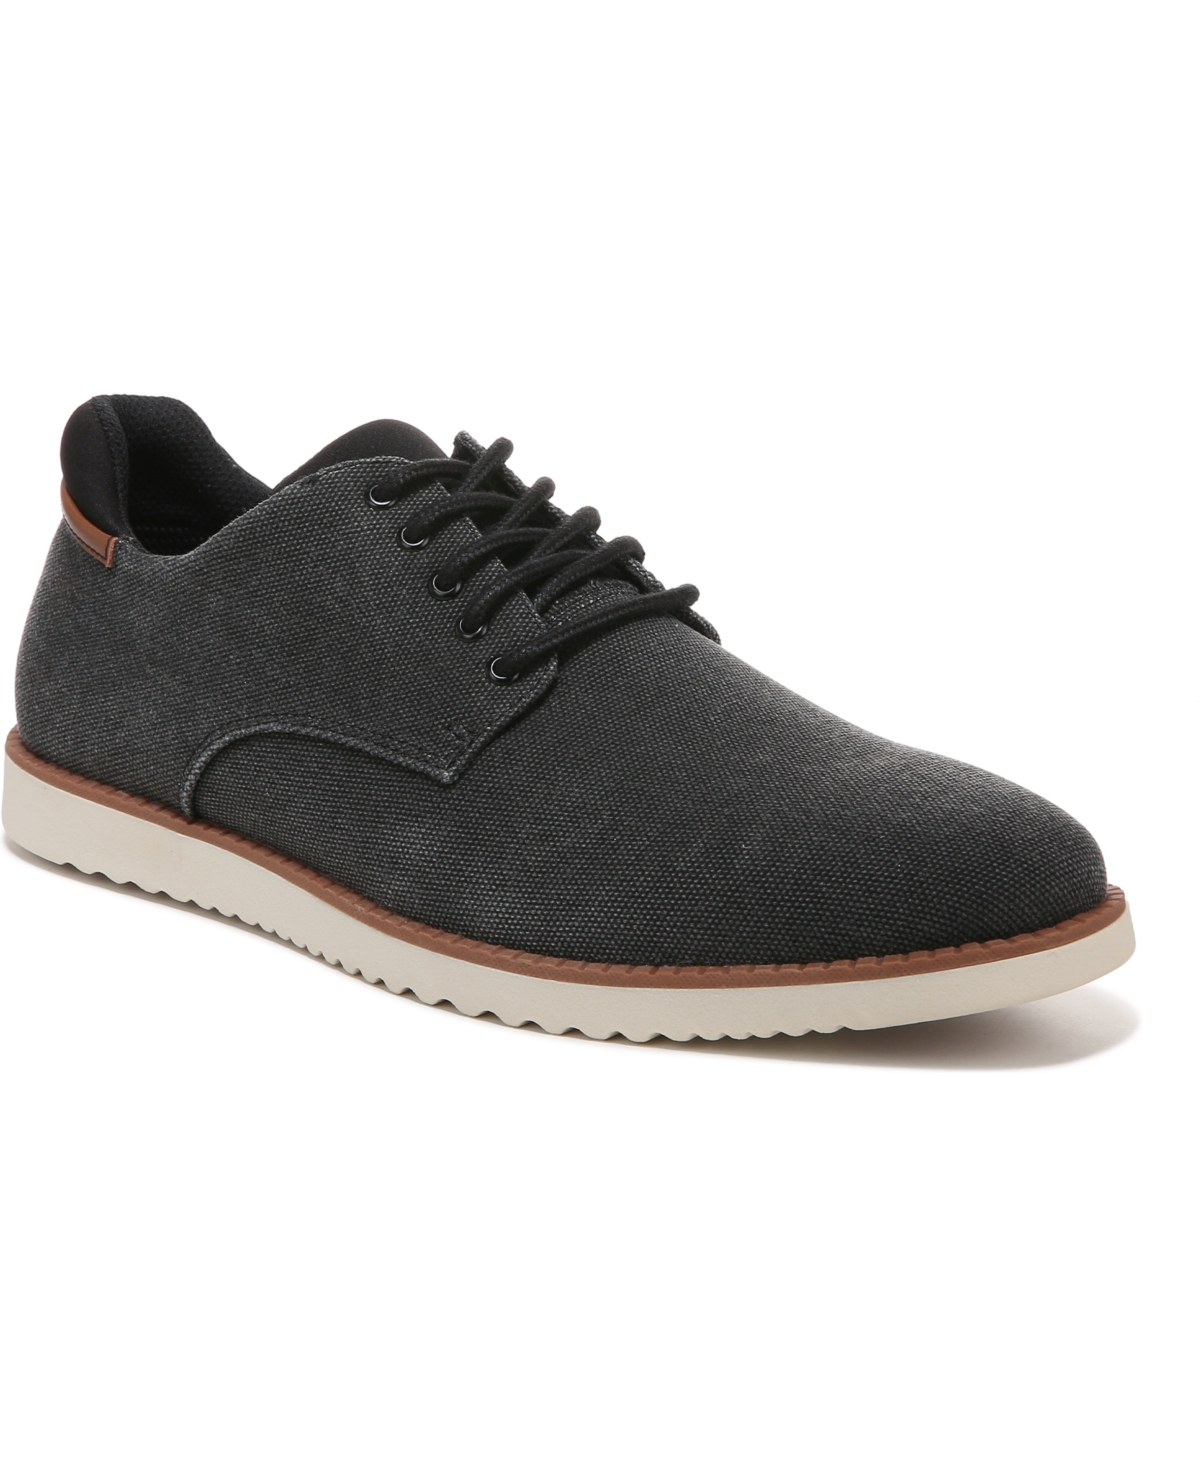 Dr. Scholl's Men's Sync Lace-up Oxfords Shoes In Black